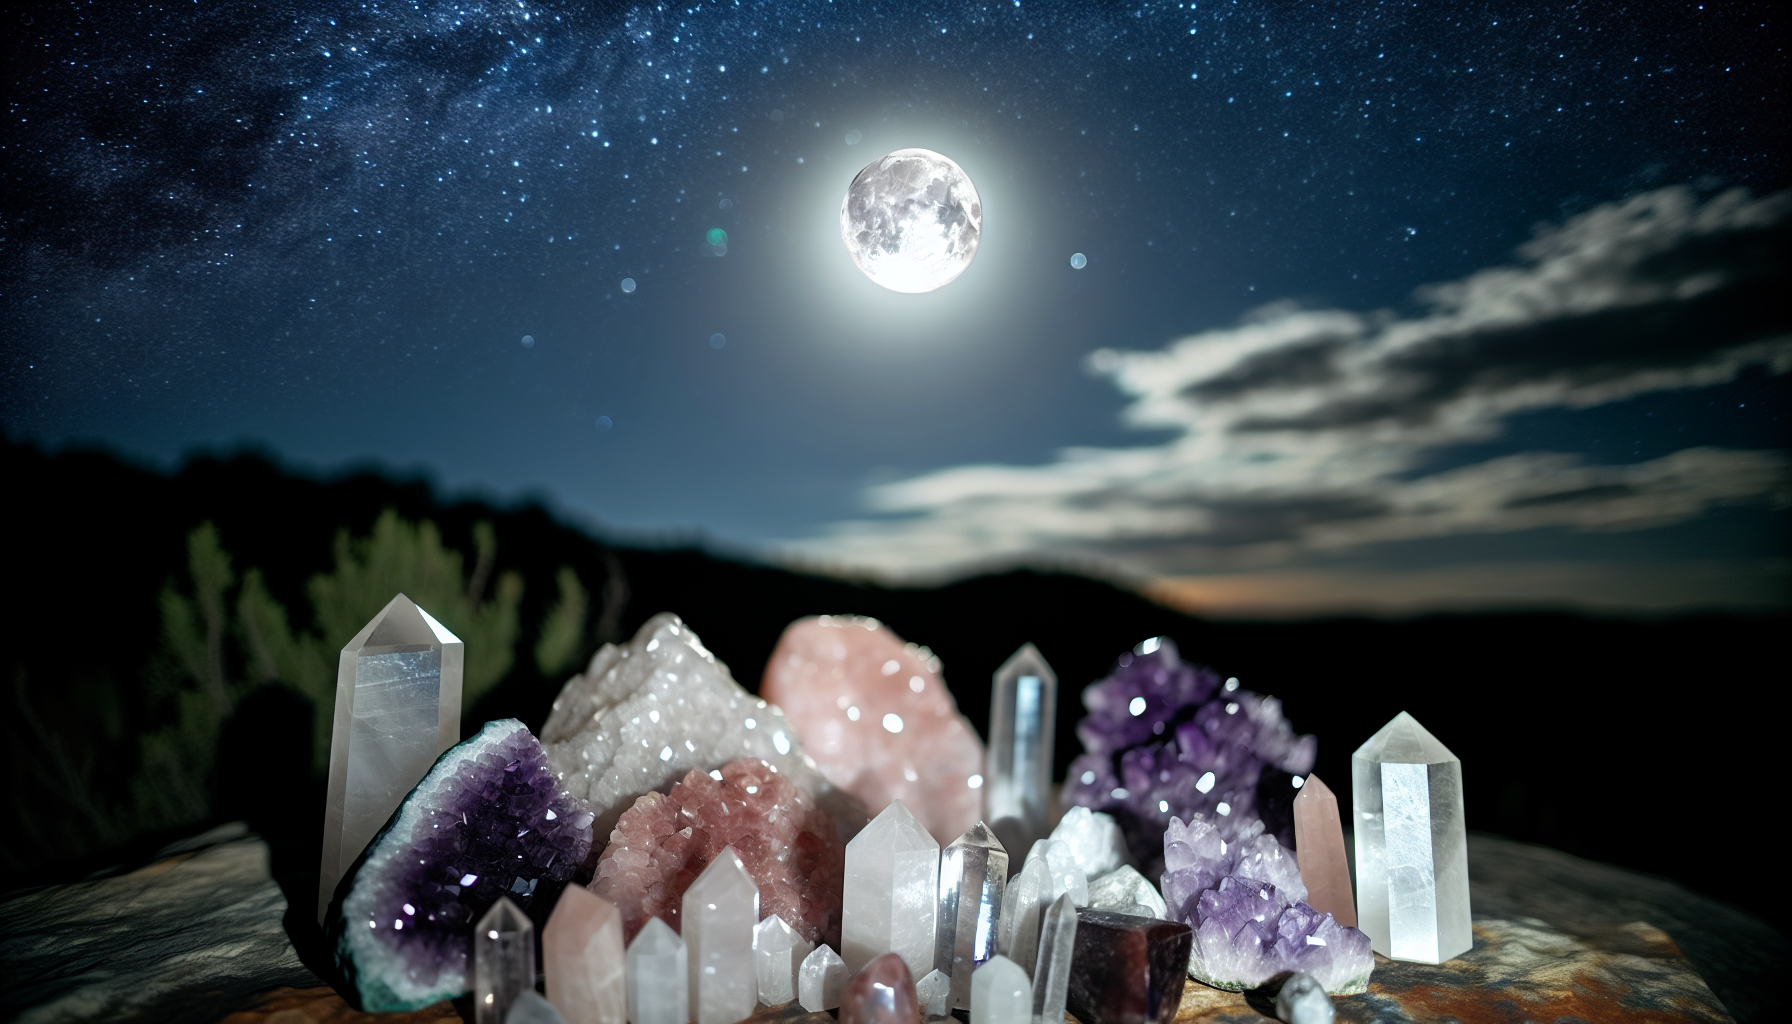 Crystals in moonlight during a full moon